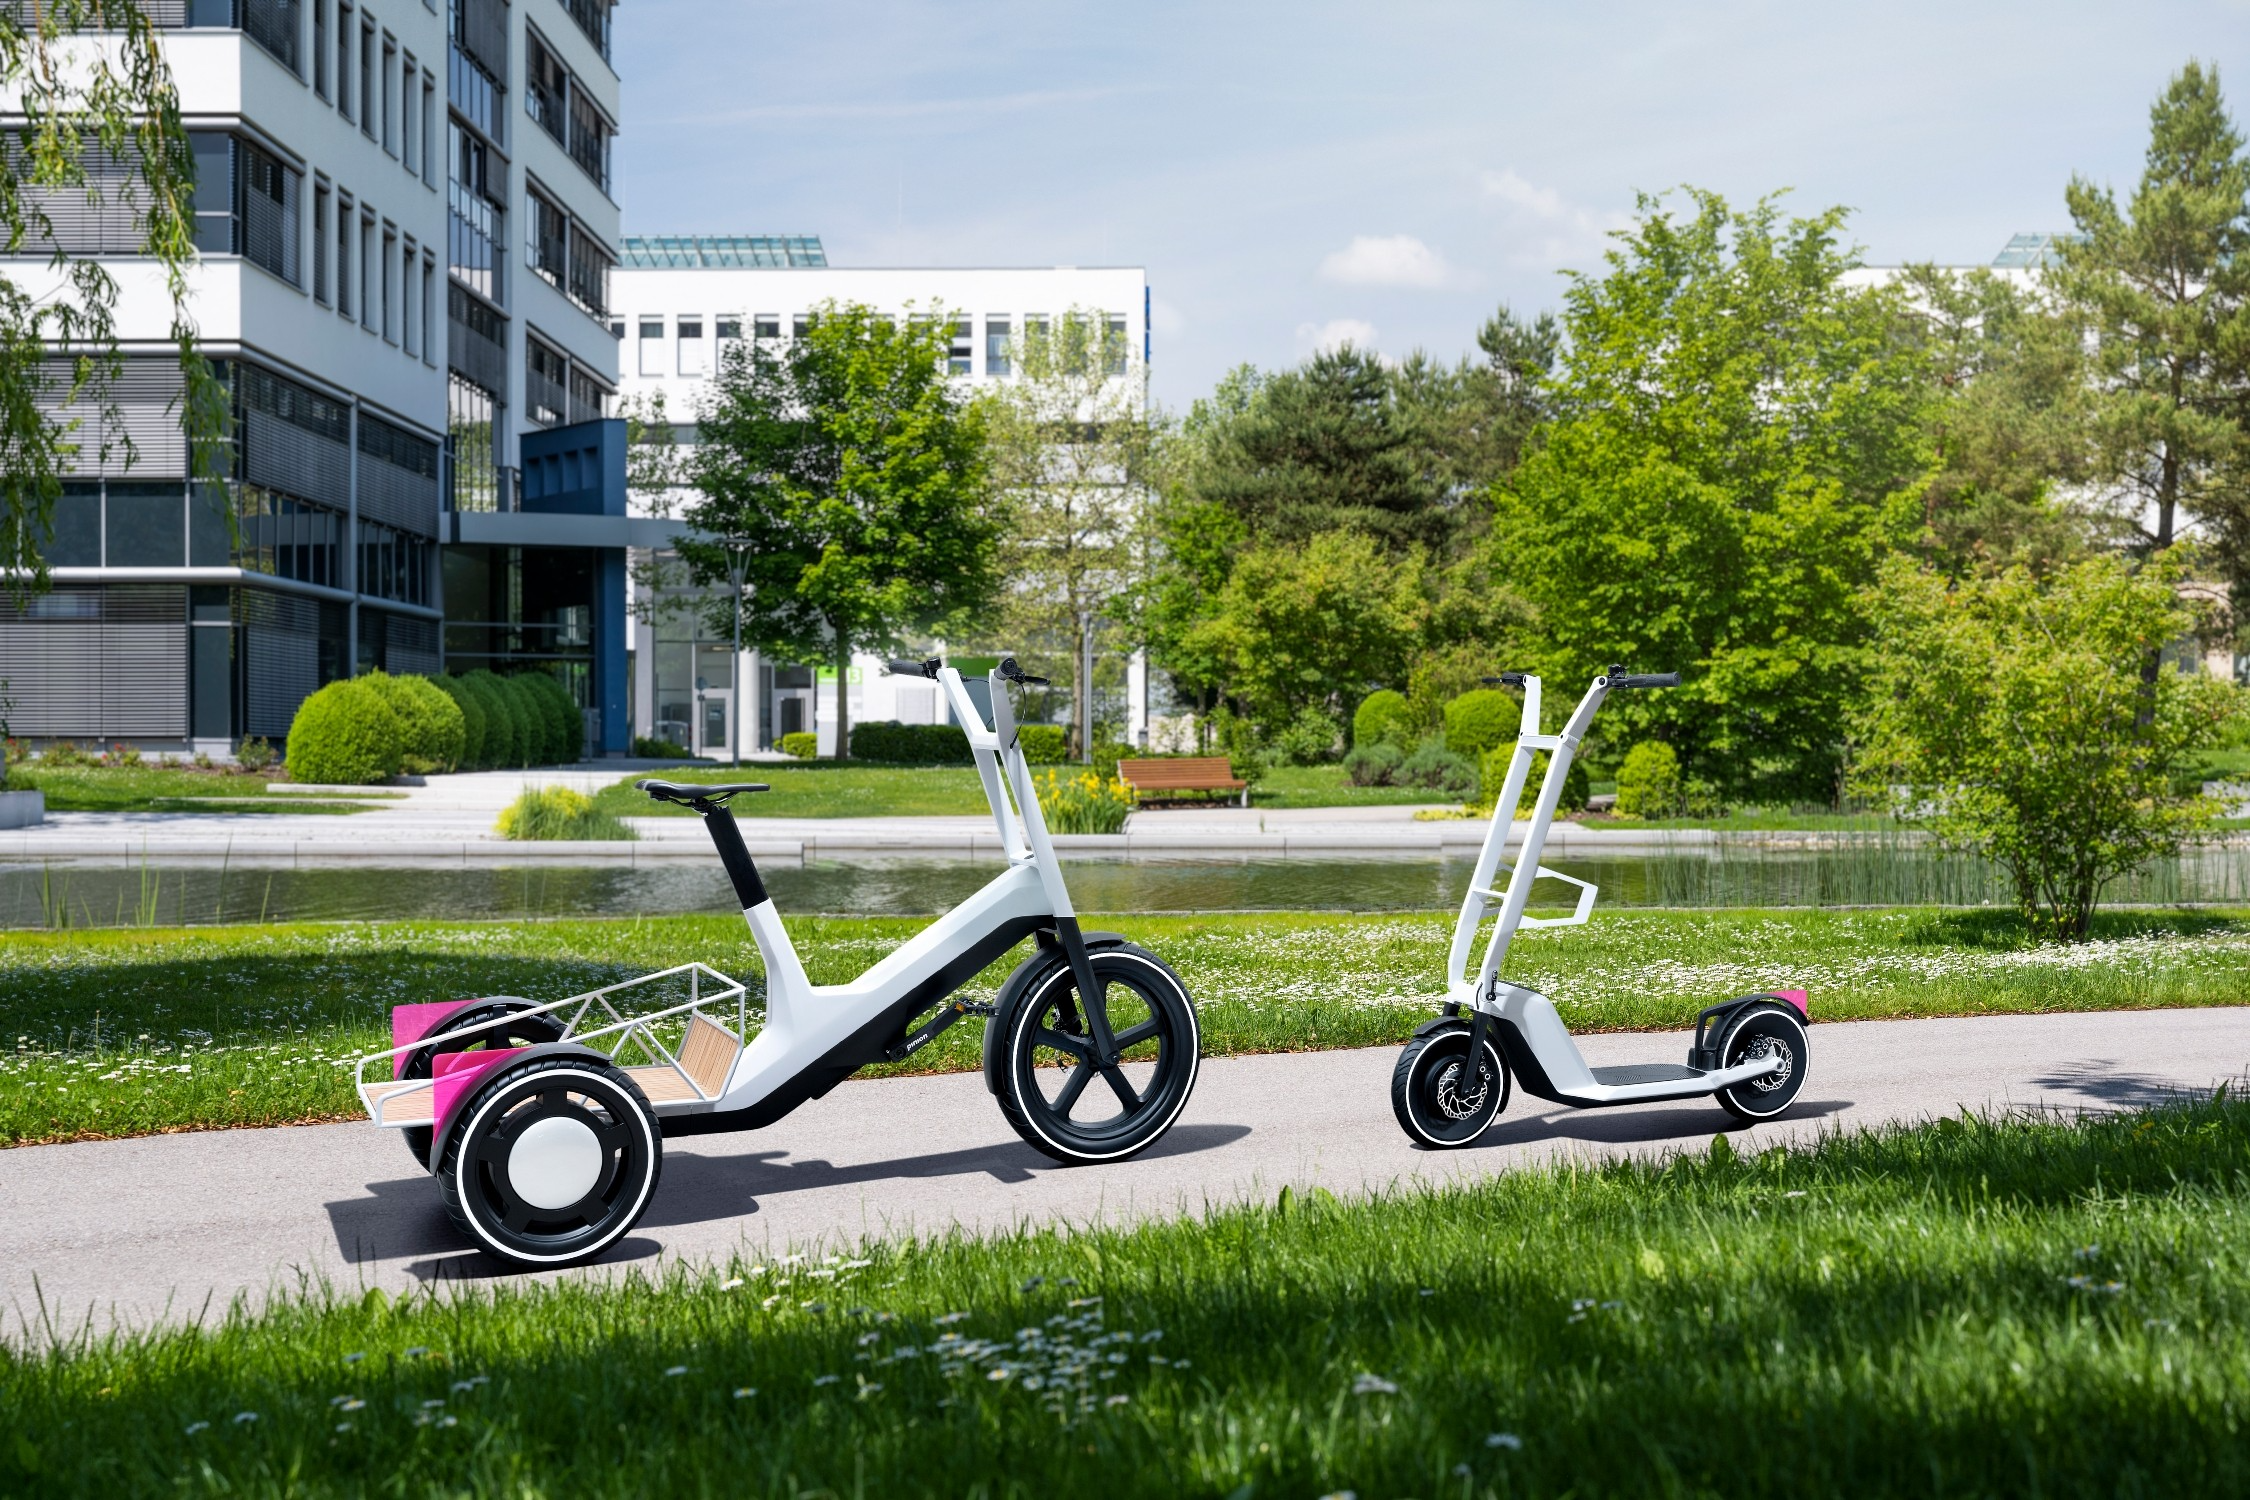 BMW develops ‘pick-up’ cargo bike and foldable e-scooter